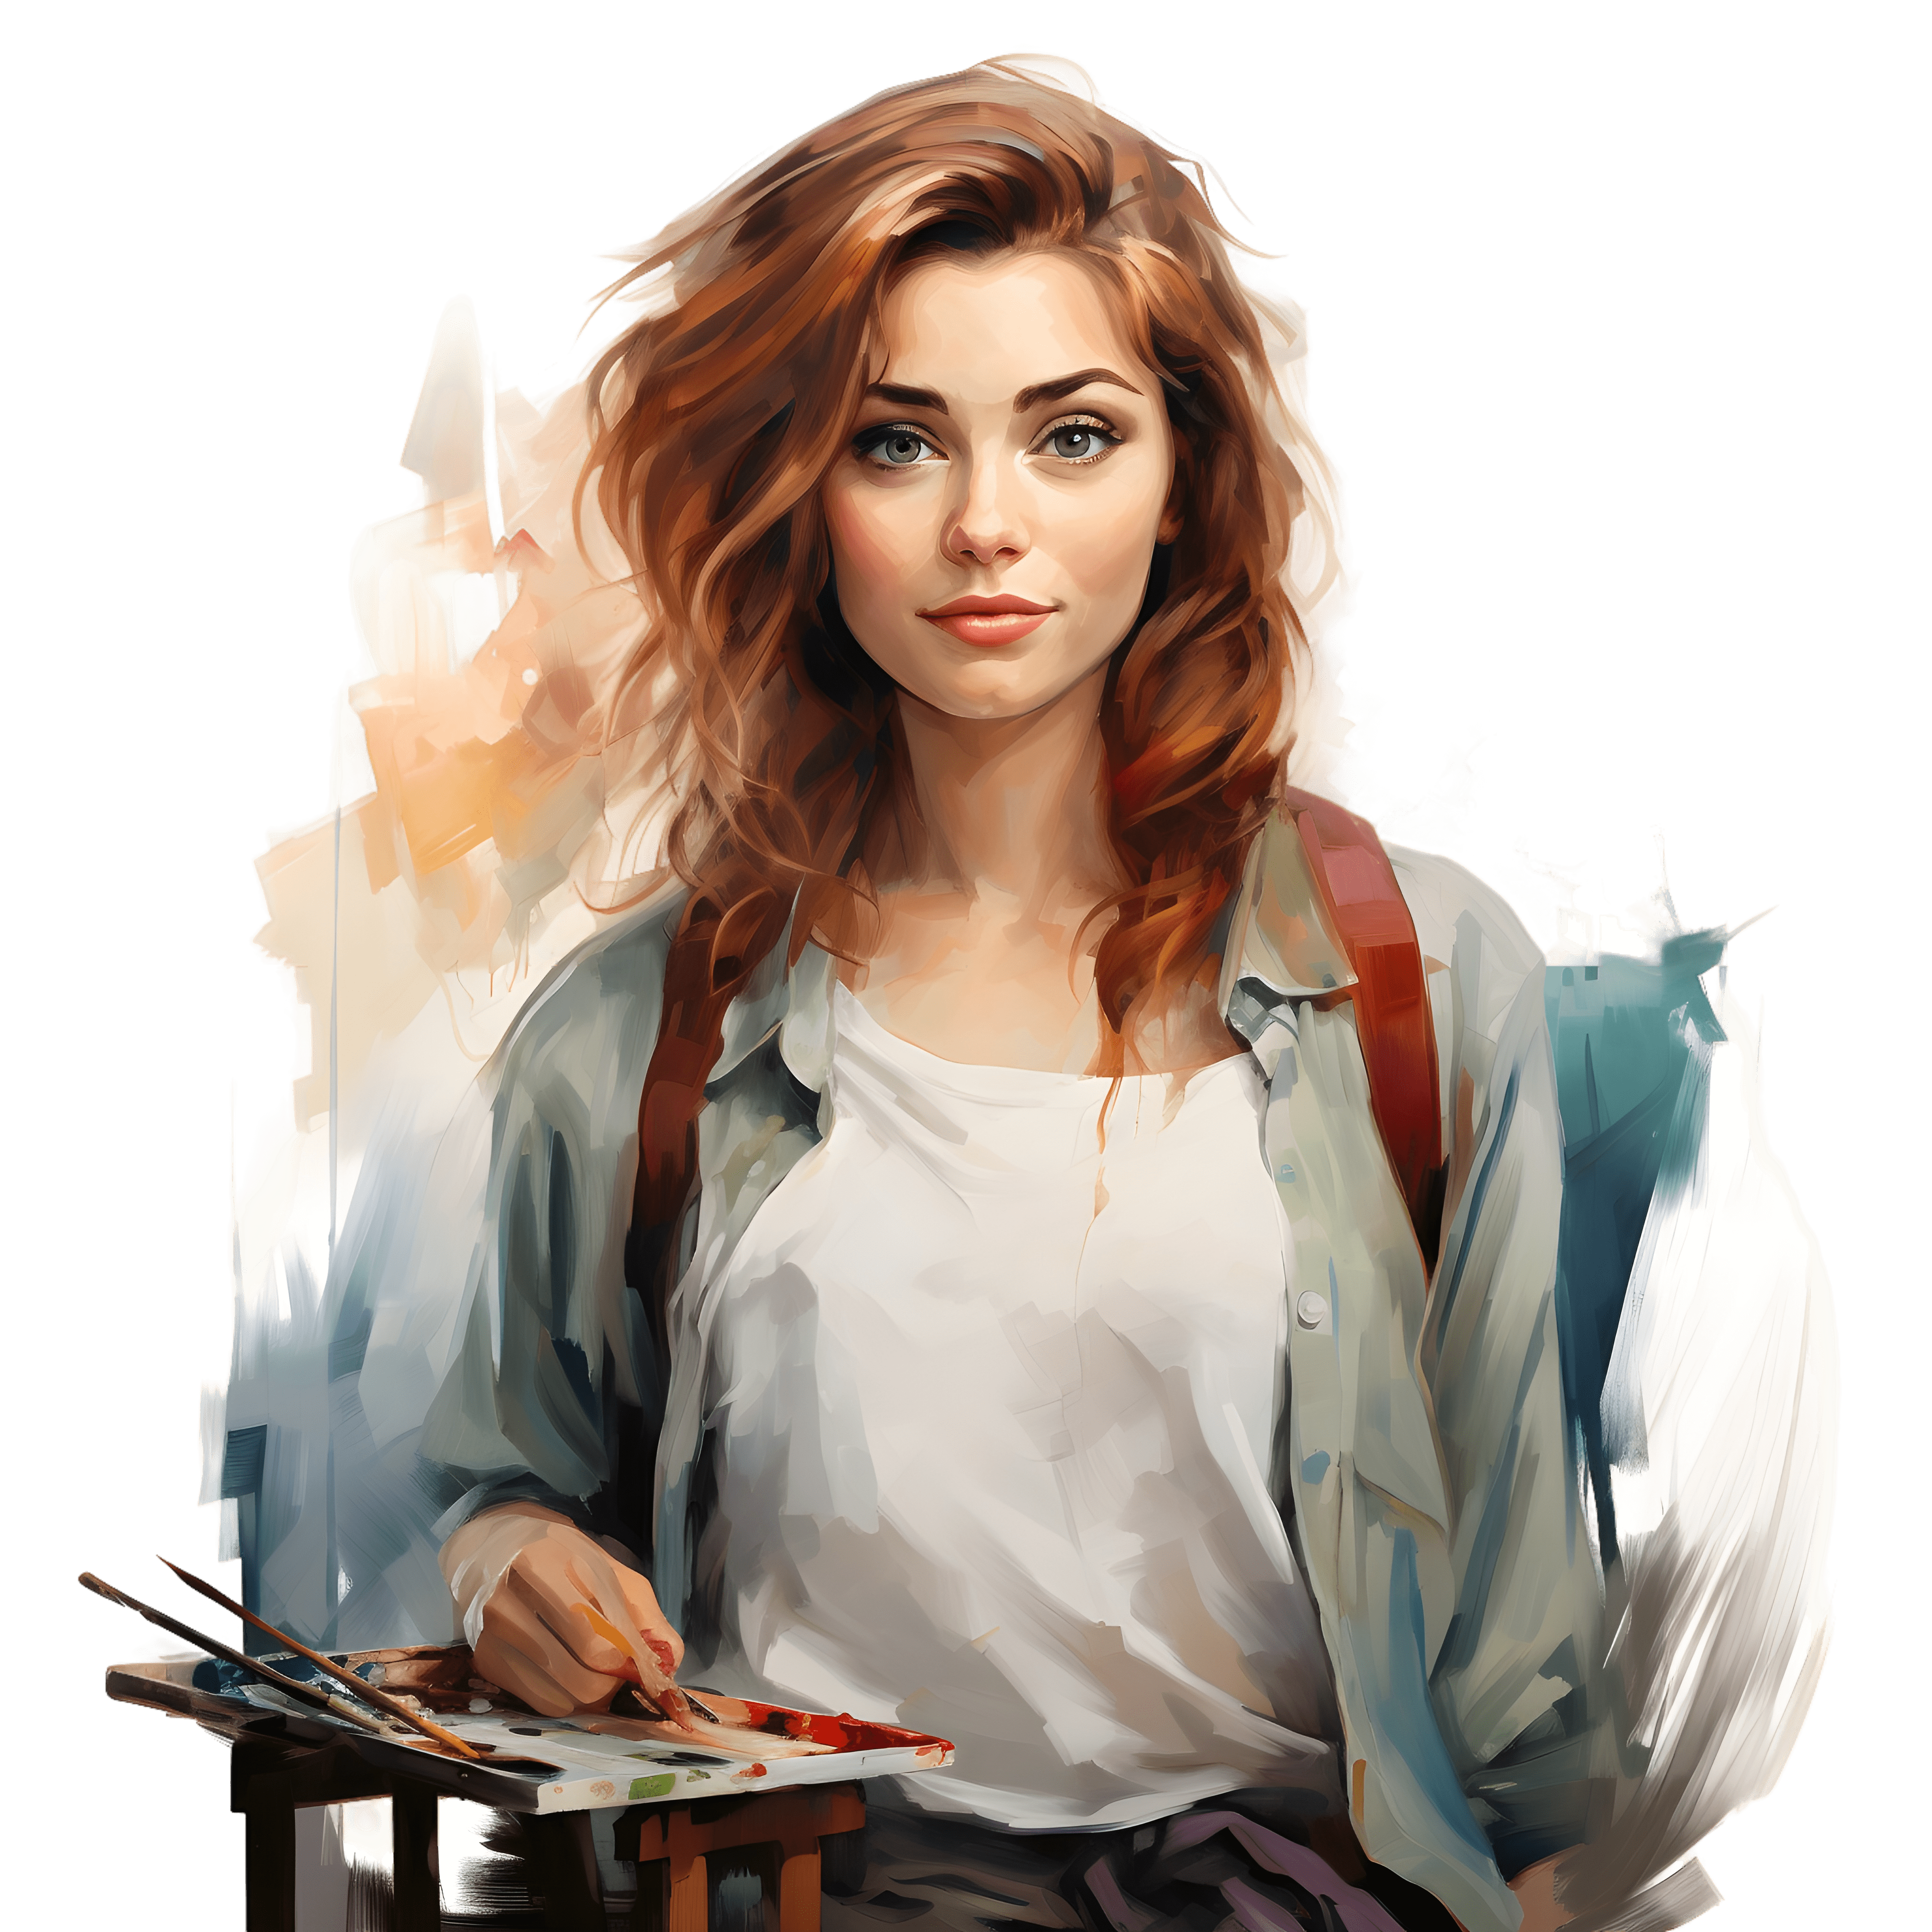 An illustration of a woman gracefully holding an easel in her cozy home.